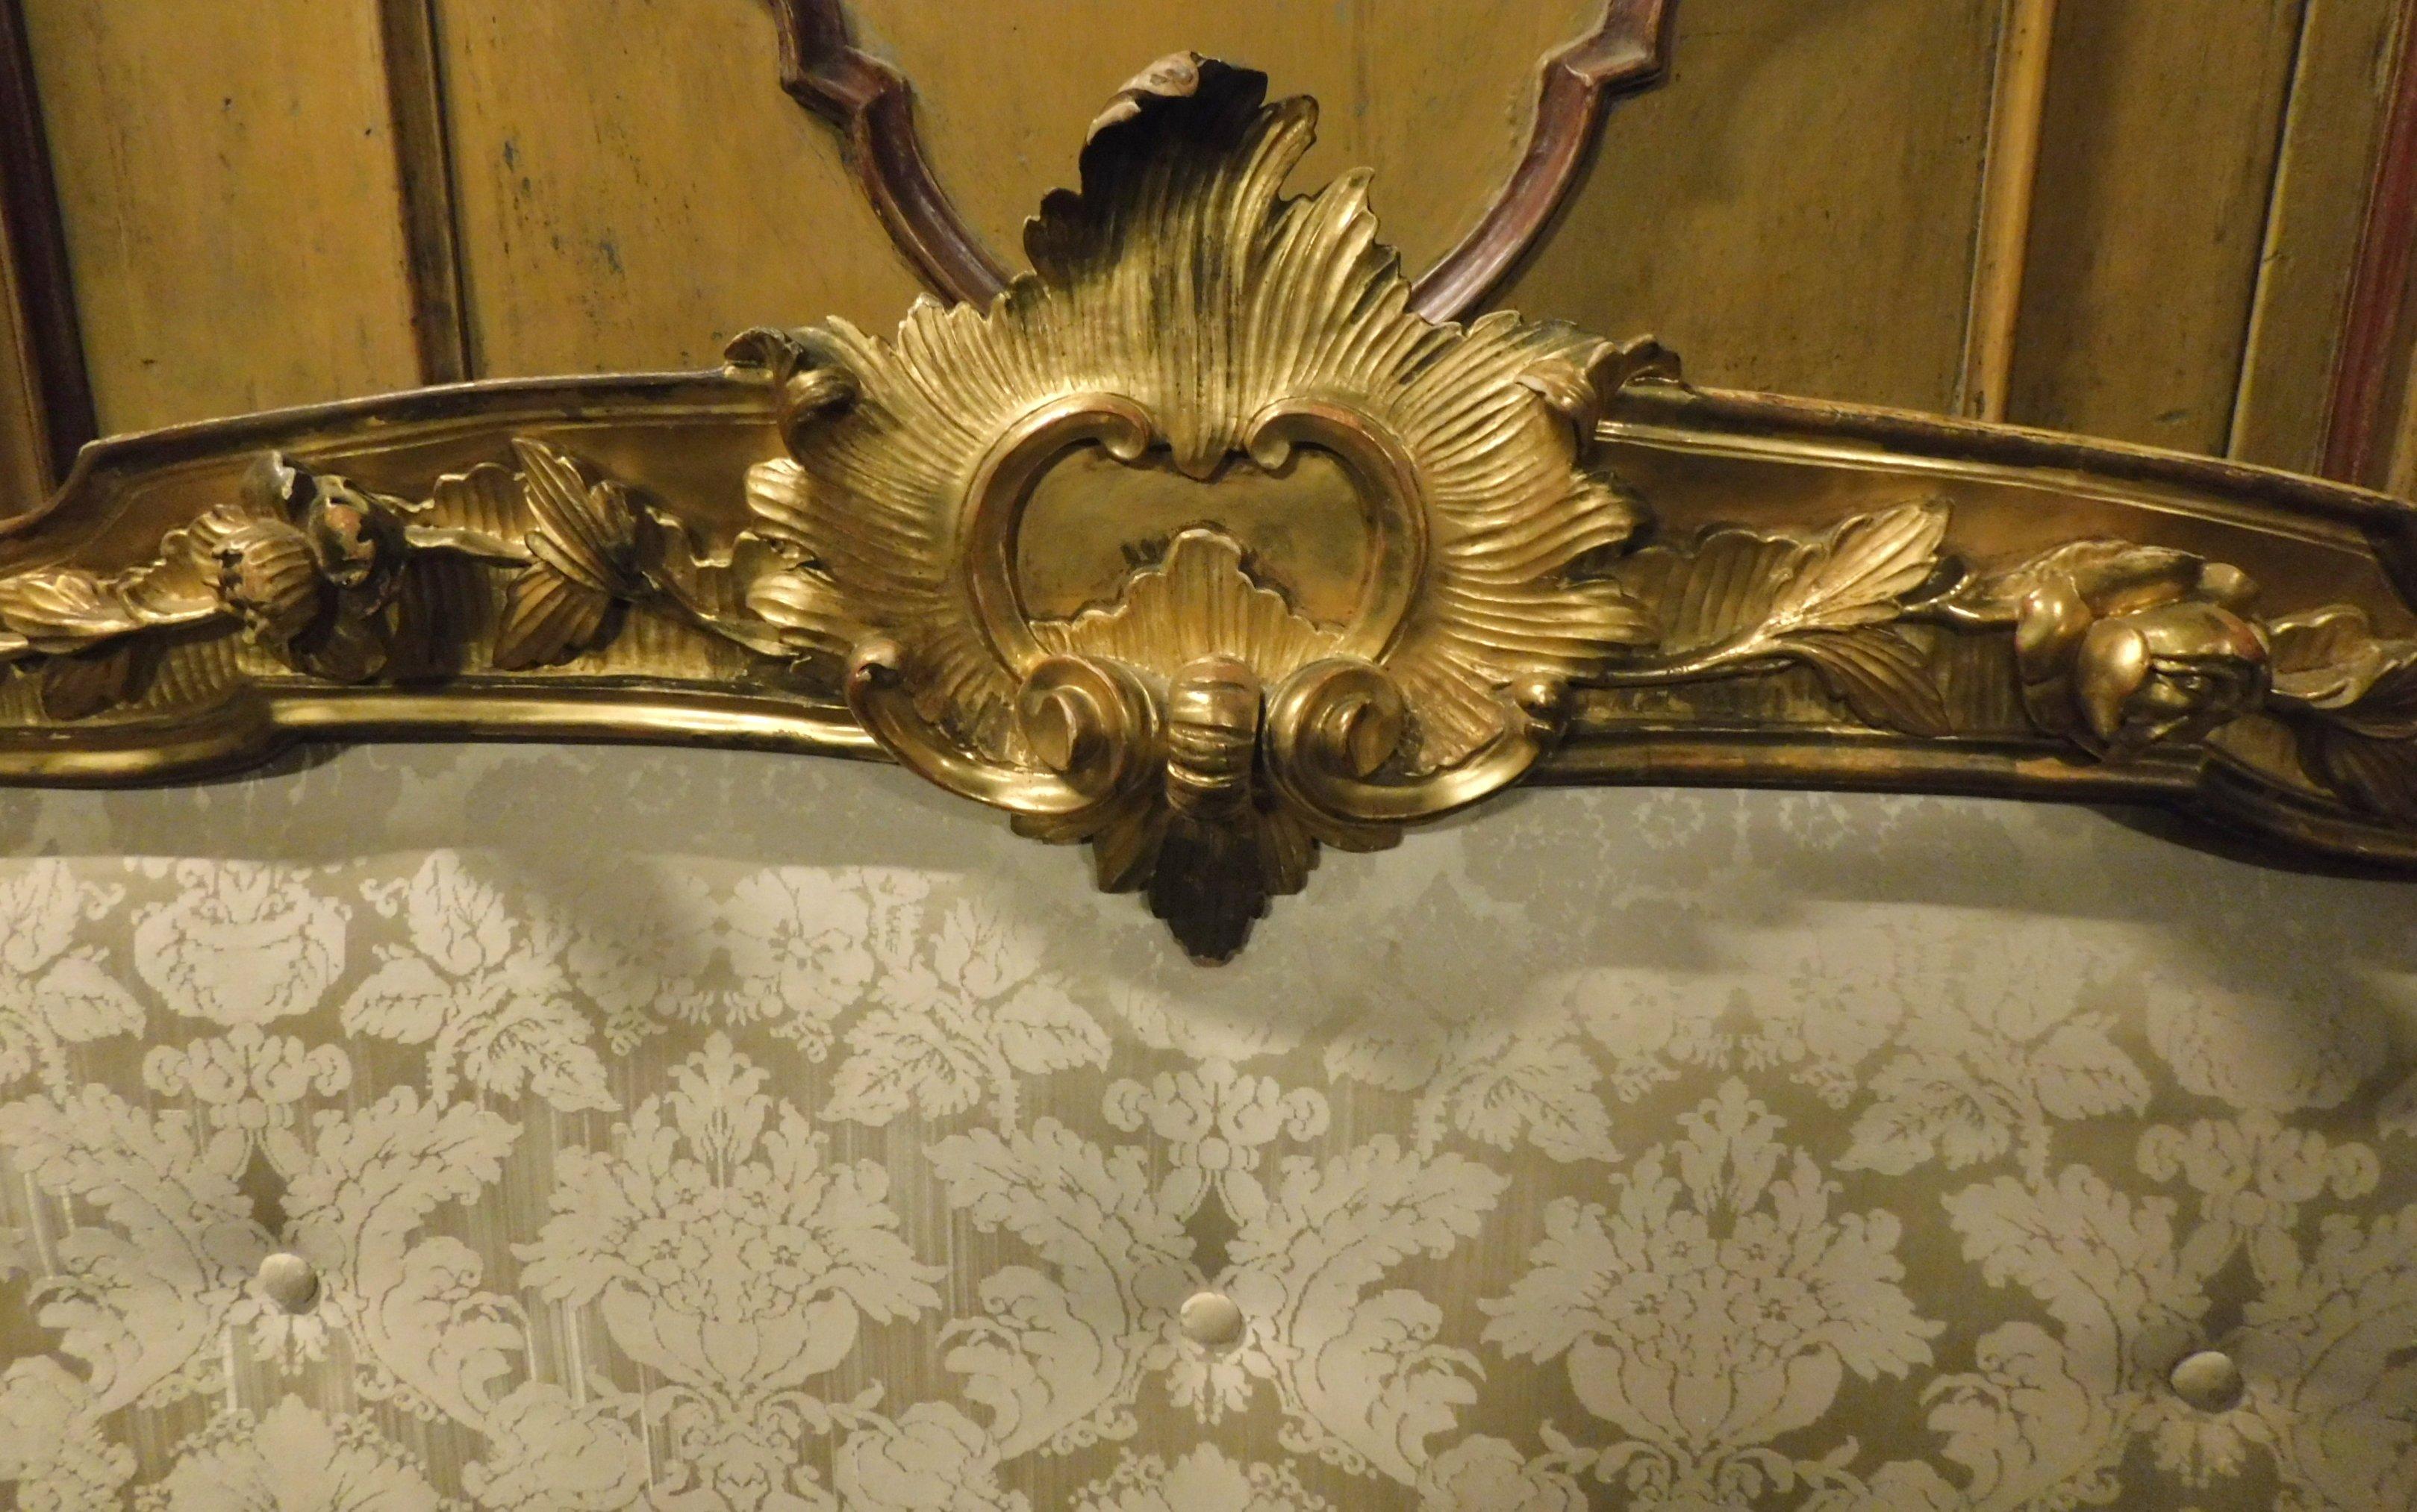 Wood 19th Century Antique Golden Bed with Damask Lined Headboard